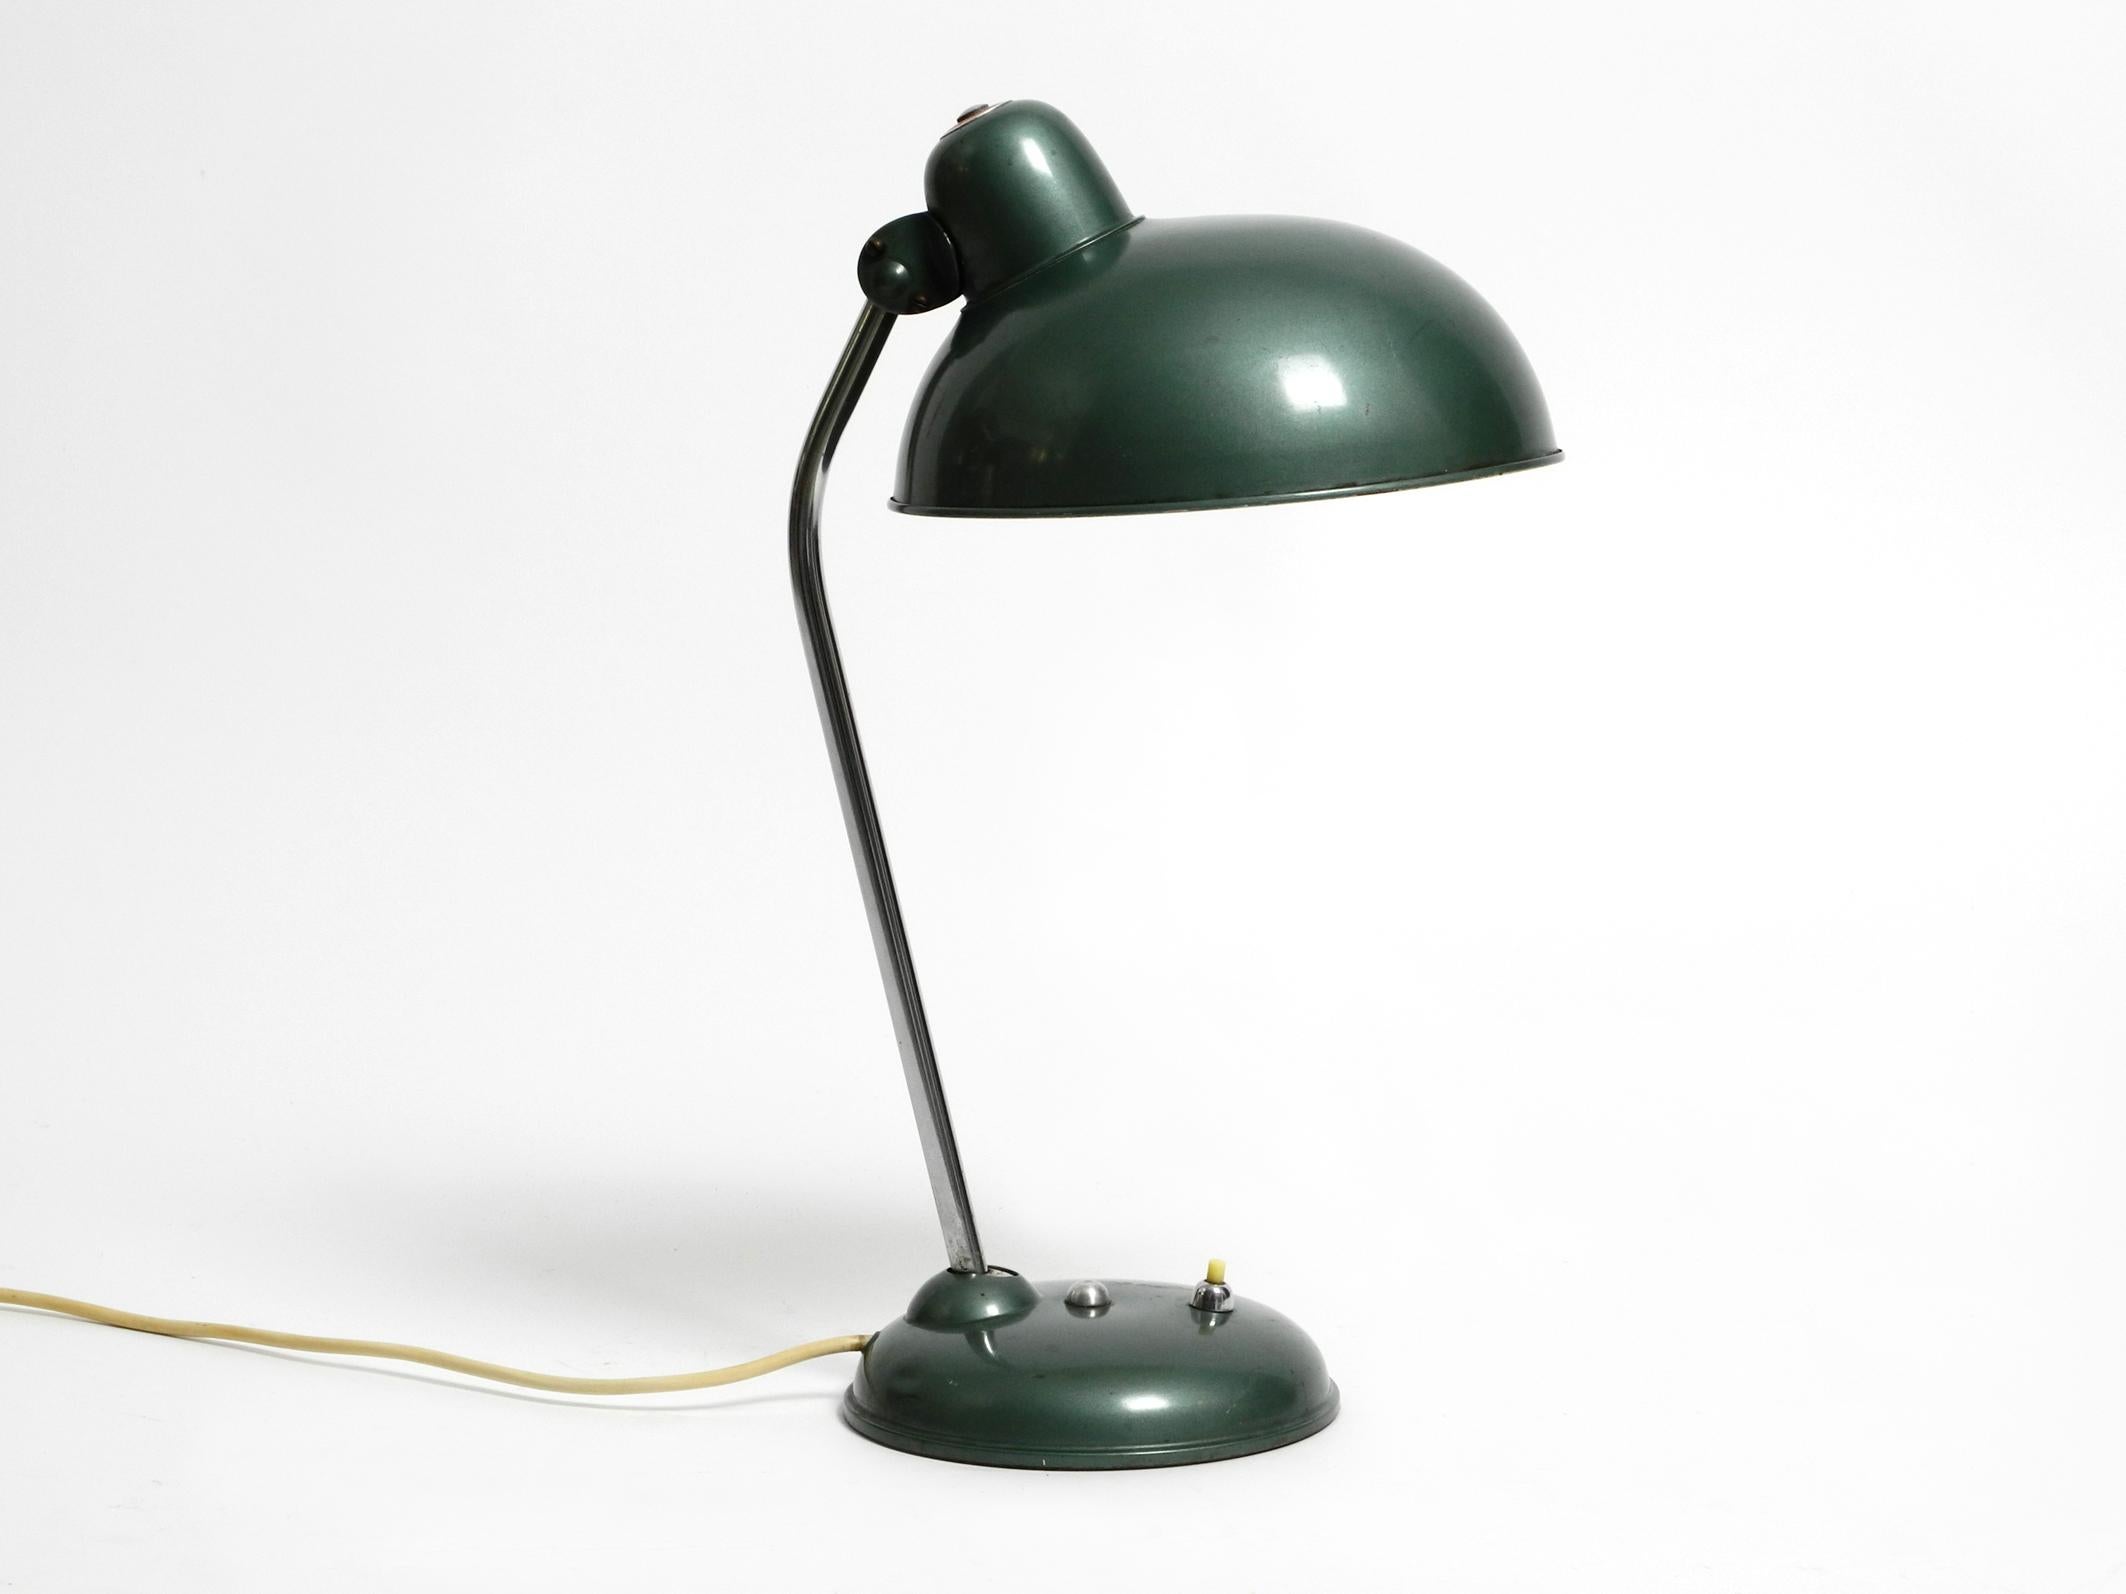 Great mid century industrial metal desk and workshop lamp.
Manufacturer is Helo Leuchten. In very rare original petrol green.
The lamp is in perfect original condition for its age of approx. 70 years.
Lampshade inside also very clean. No rust on